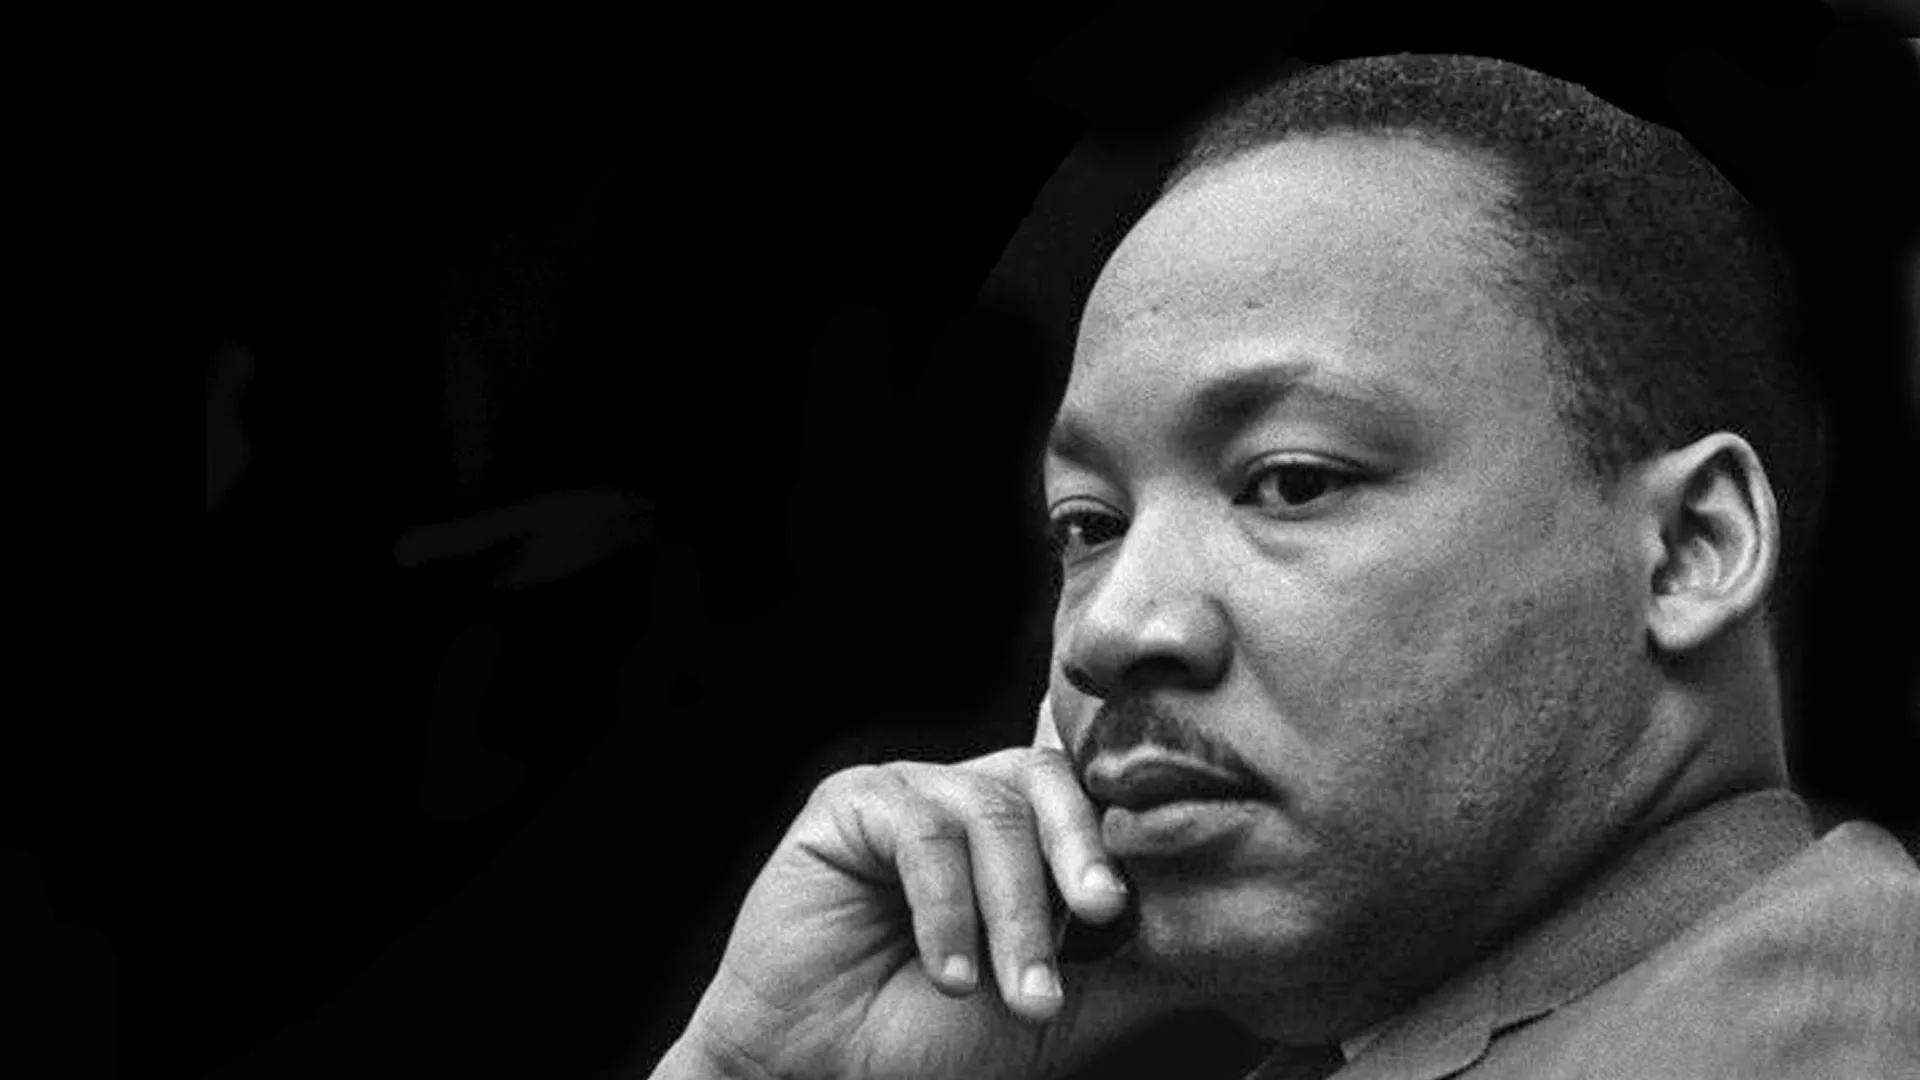 Martin Luther King Jr., Civil rights activism, Selma protest, Britannica's perspective, 1920x1080 Full HD Desktop